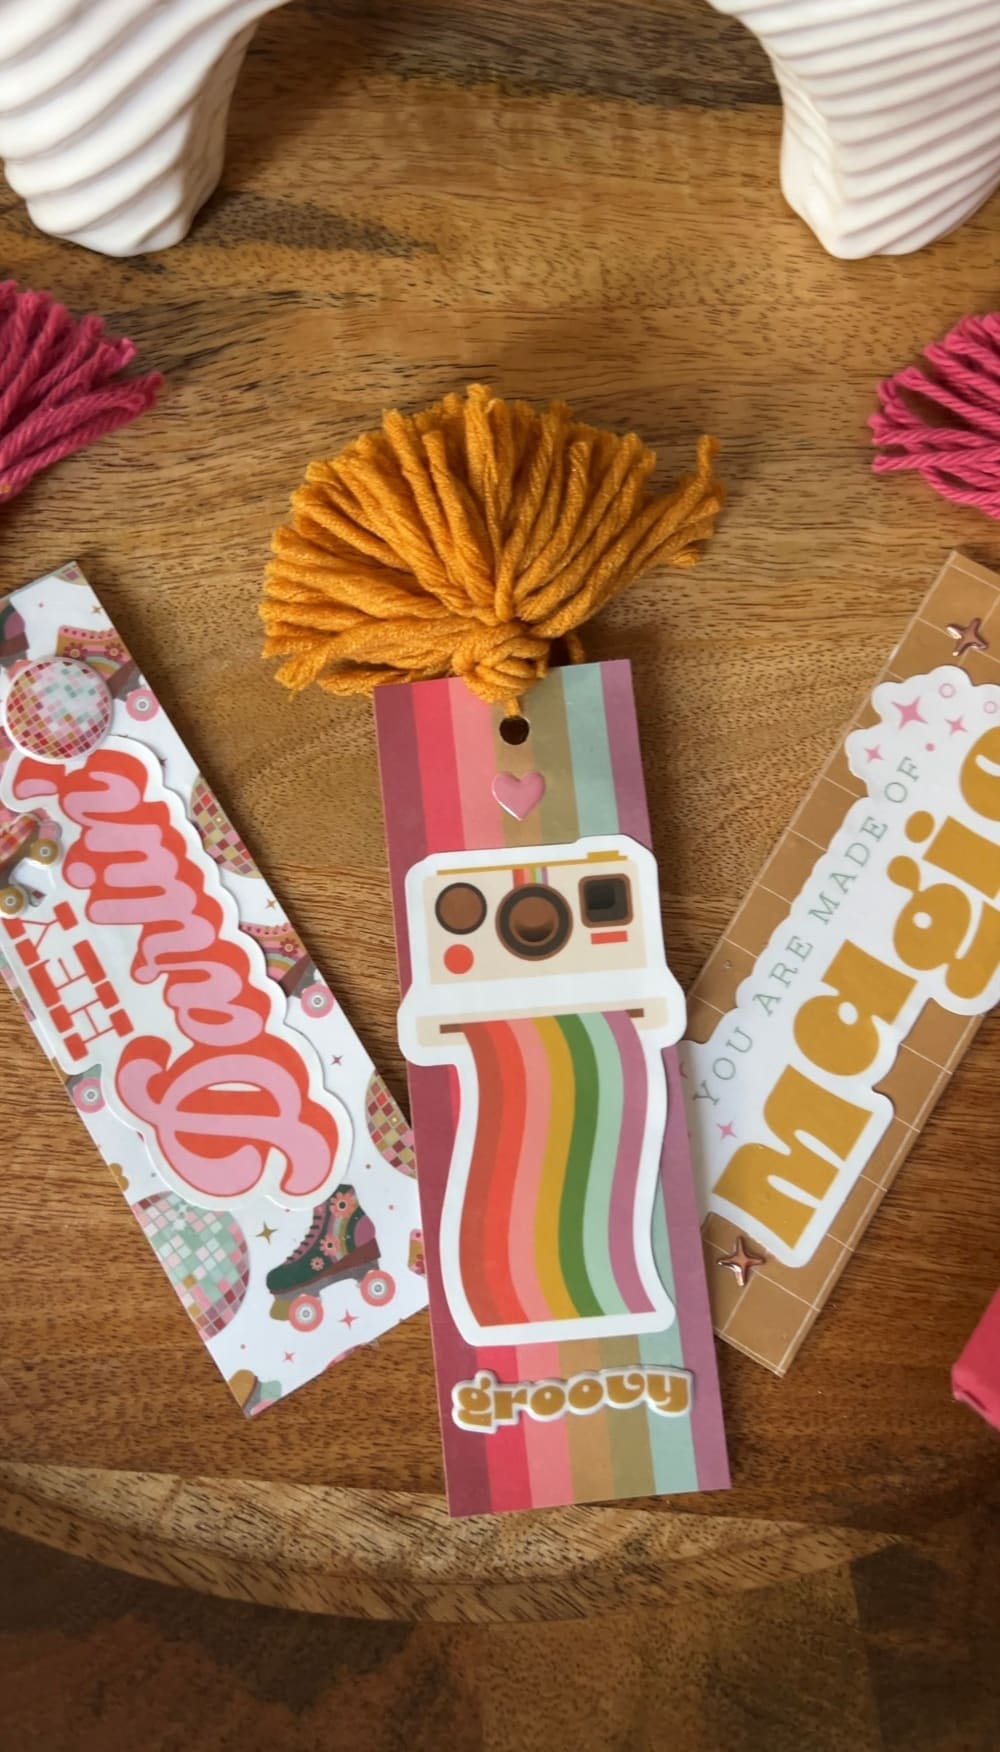 Kids Craft: DIY Tassel Bookmarks. Encourage love of reading with your kids by making personalized DIY Tassel Bookmarks with your kids using colorful paper, stickers, and yarn.